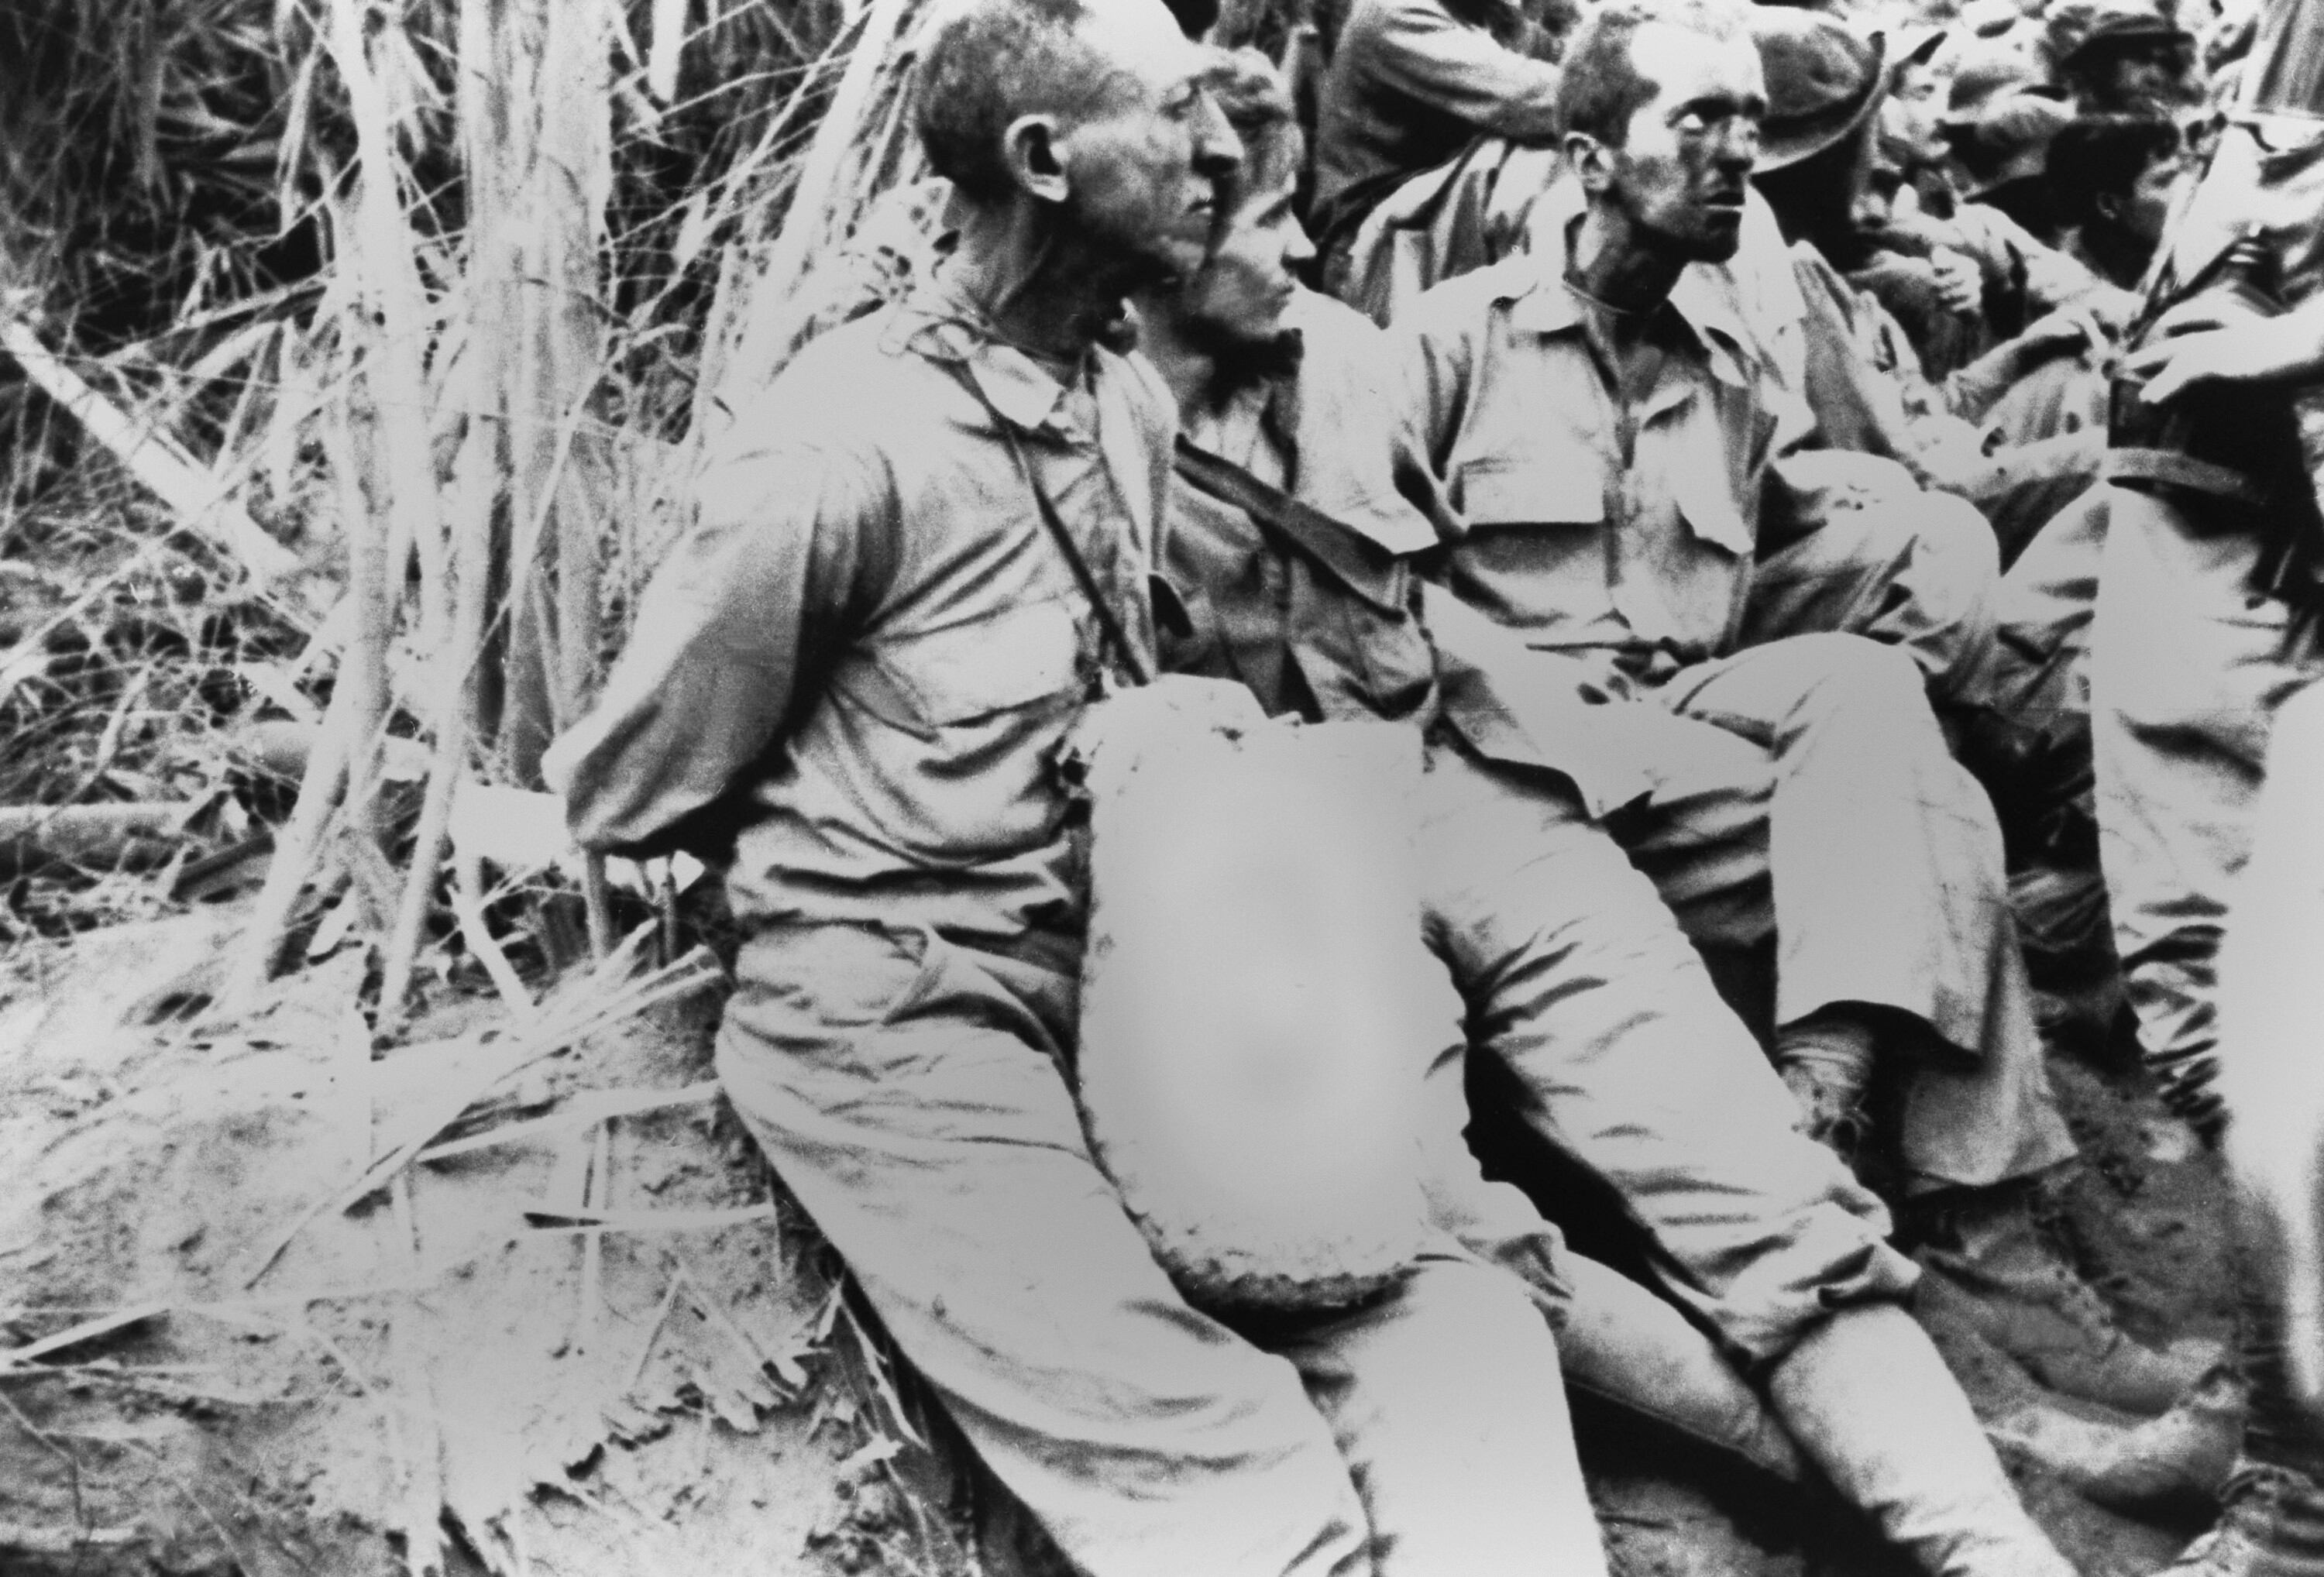 A group of US POWs on the Bataan Death March.